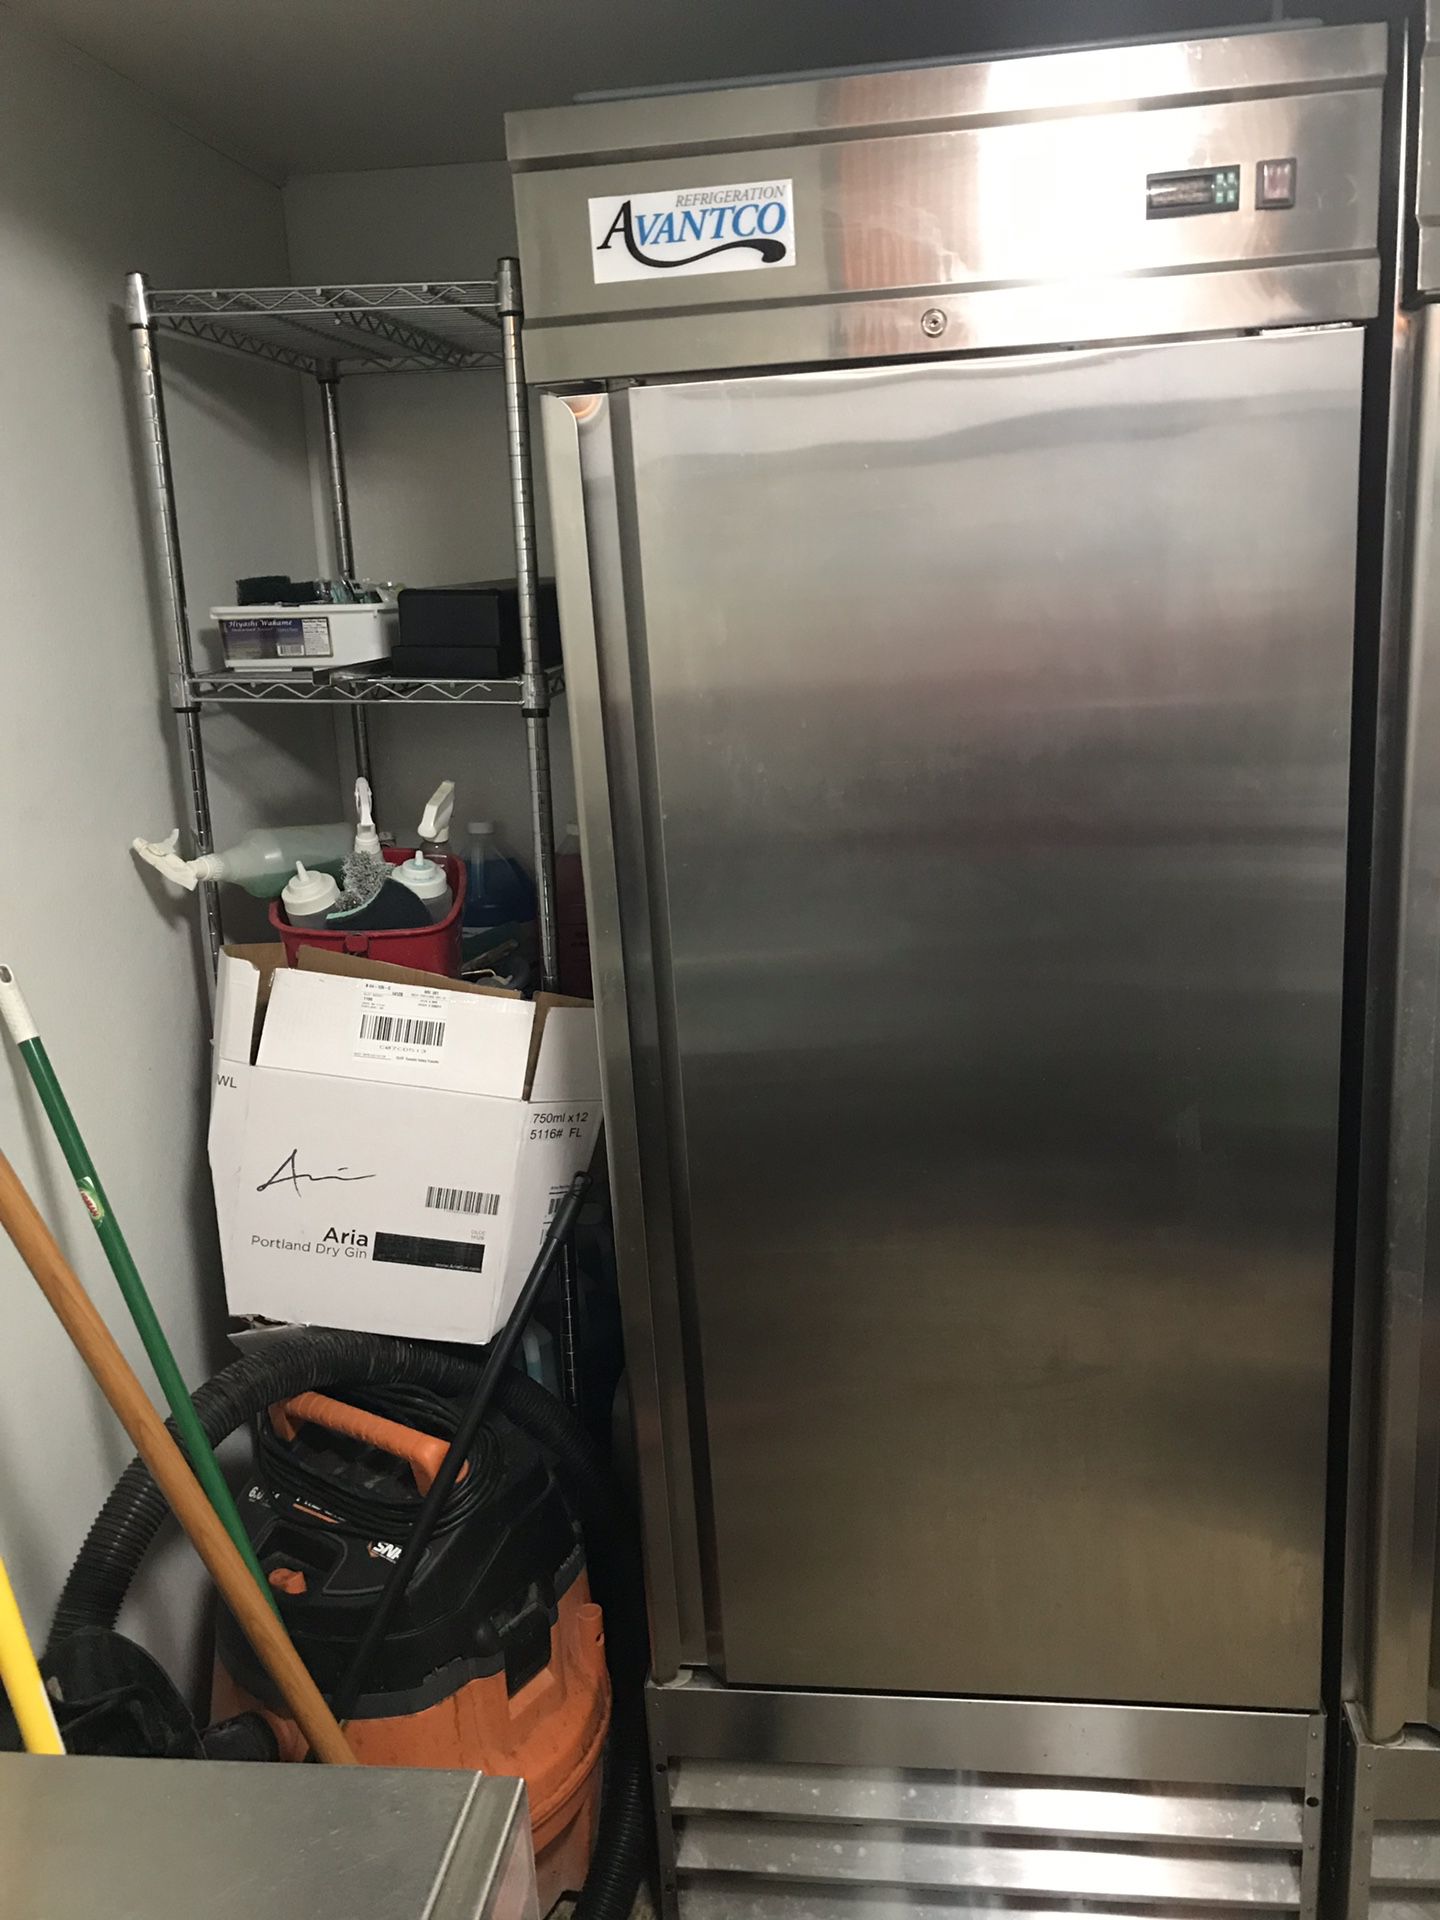 Commercial freezer in good condition